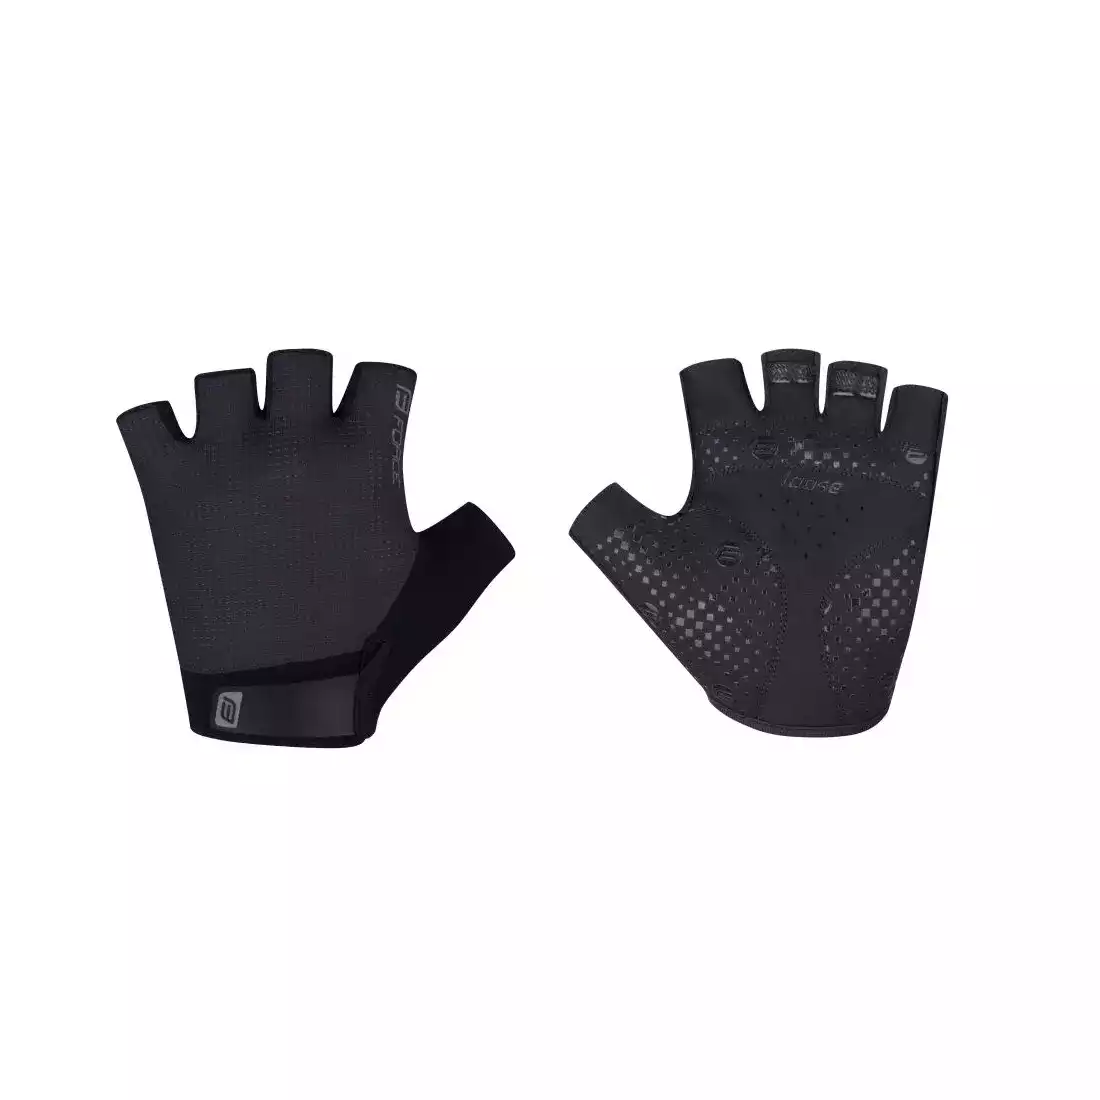 FORCE LOOSE cycling gloves, black